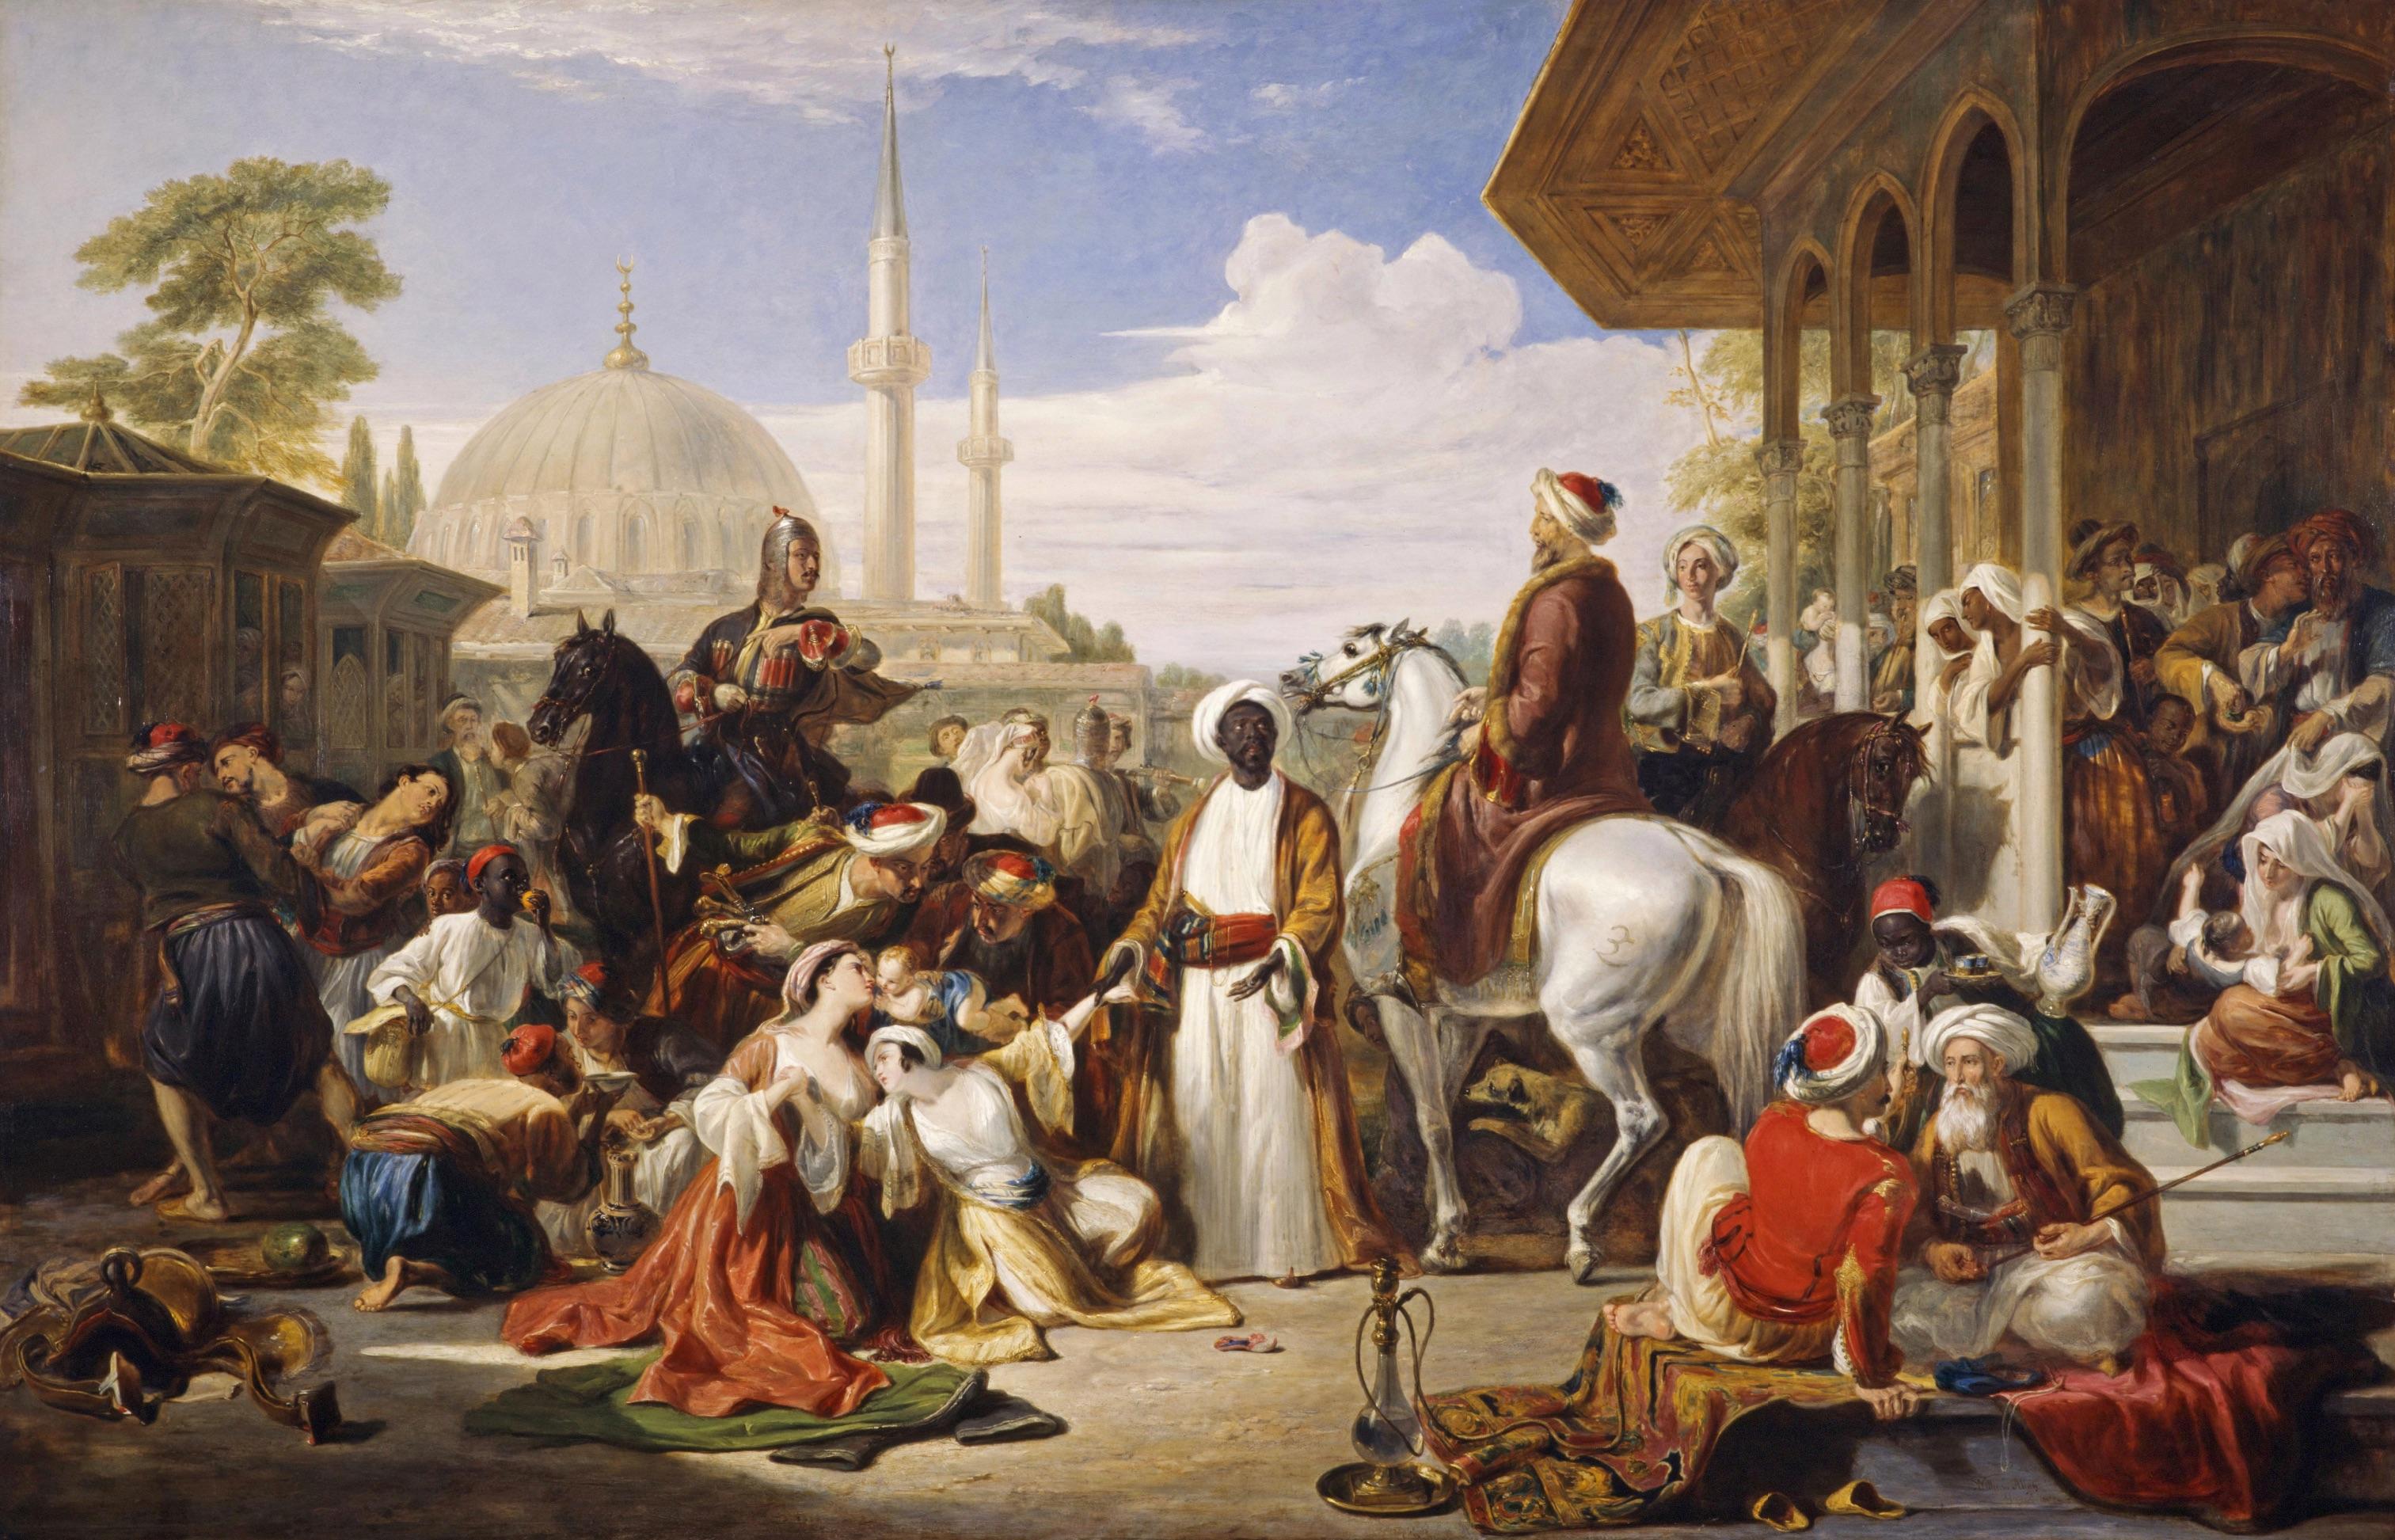 Siyah: Deciphering the Ottoman Involvement in the African Slave Trade